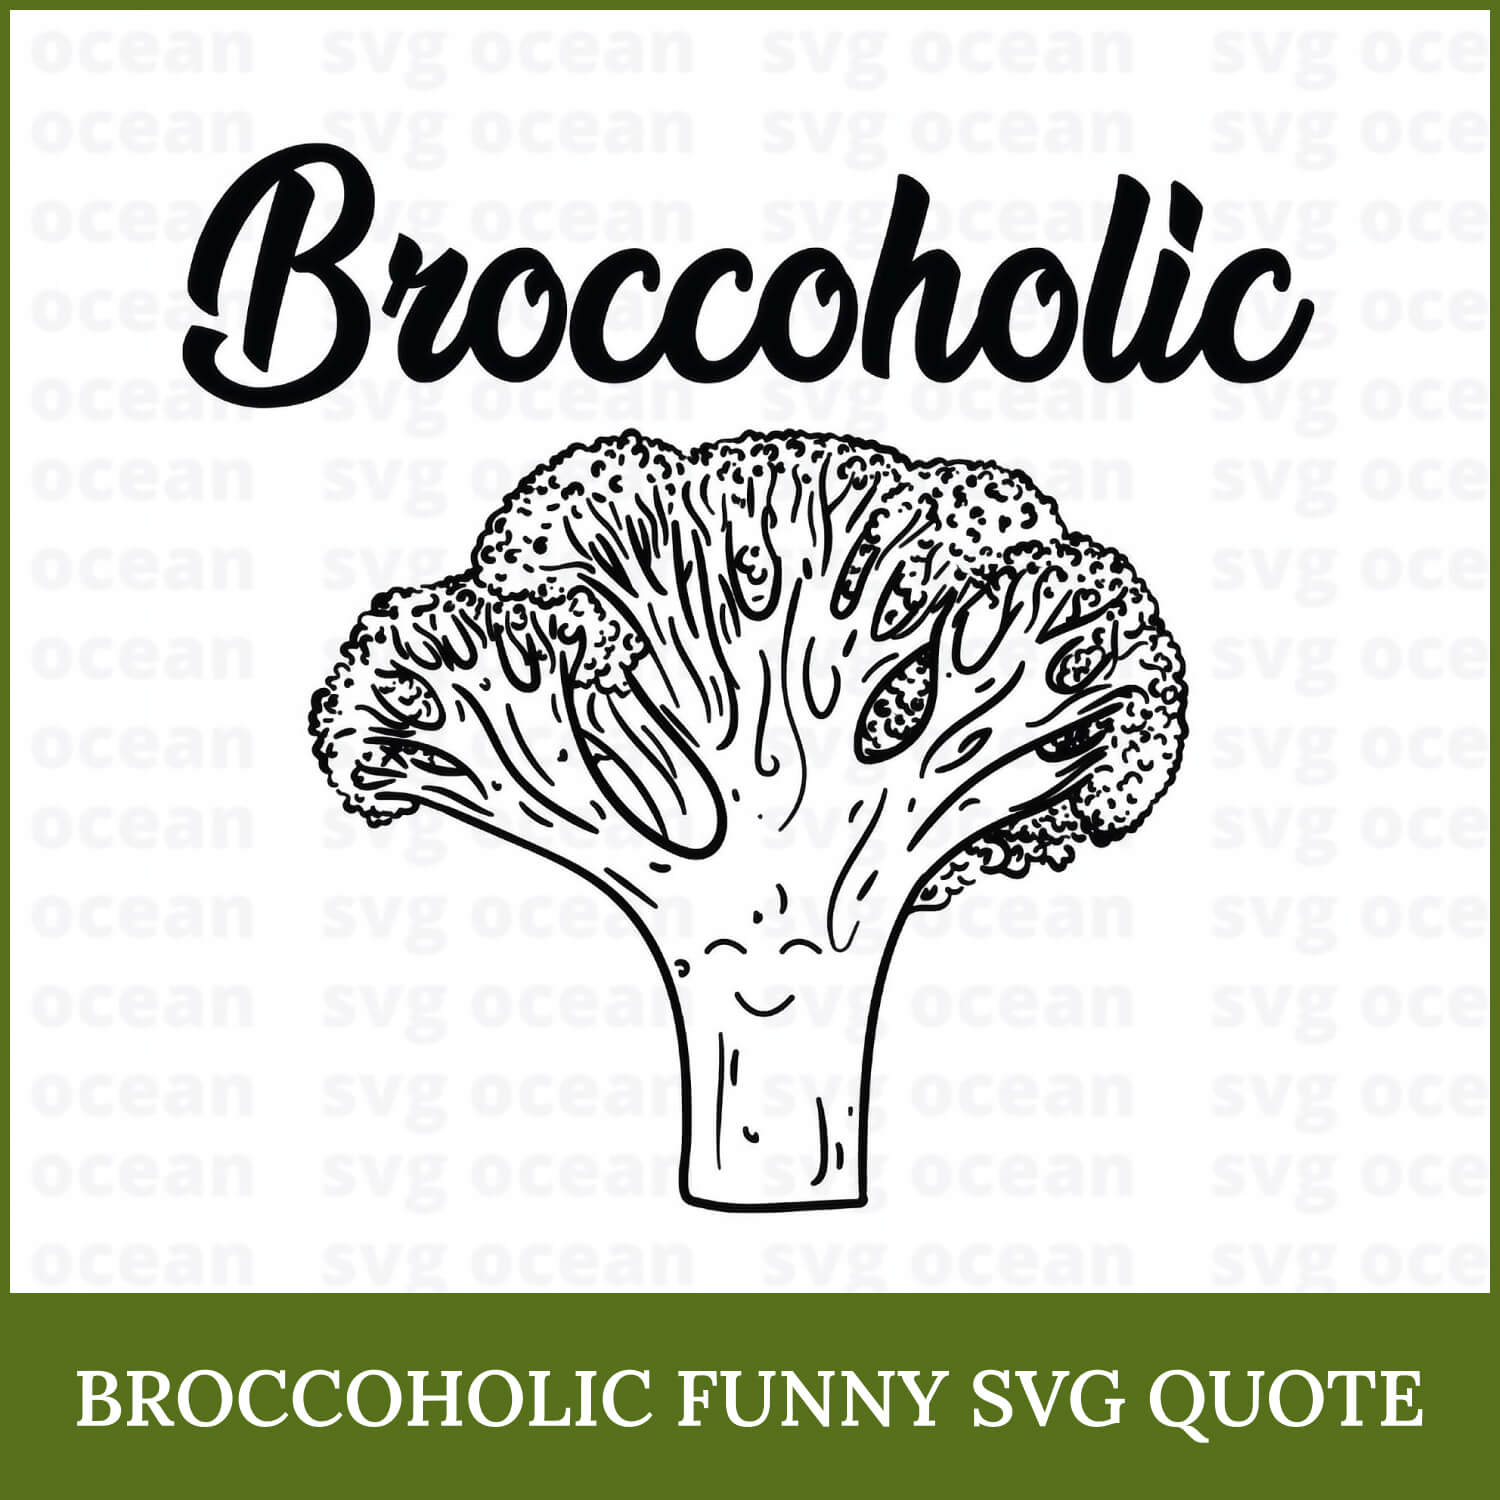 The inscription "Broccoholic" is written next to the image of broccoli.